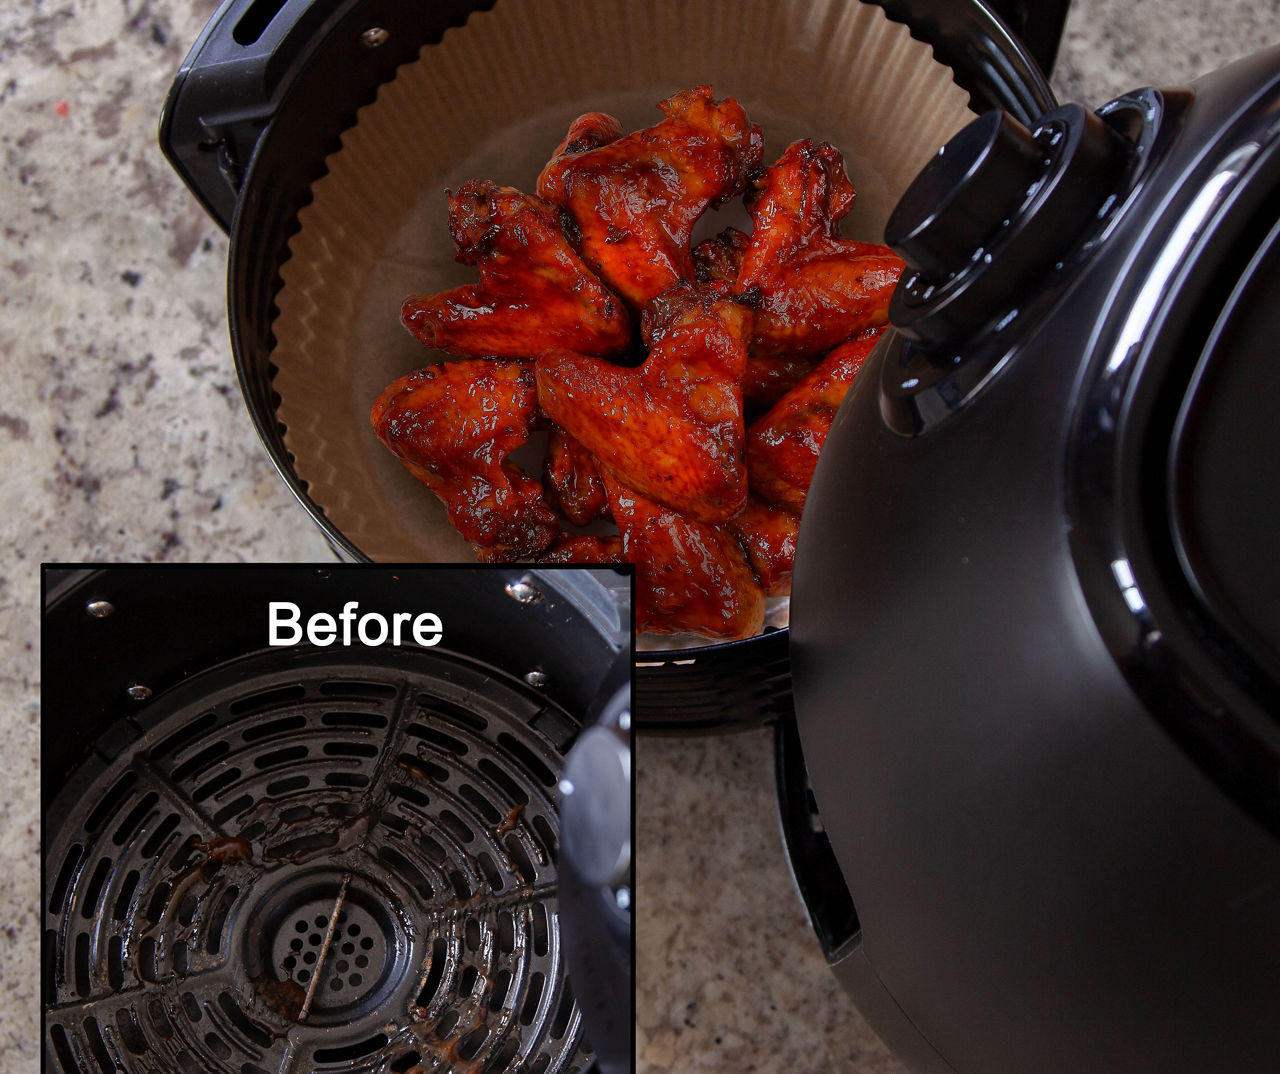 Air Fryer Disposable Paper Liner Keep Your Air Fryer Clean Round